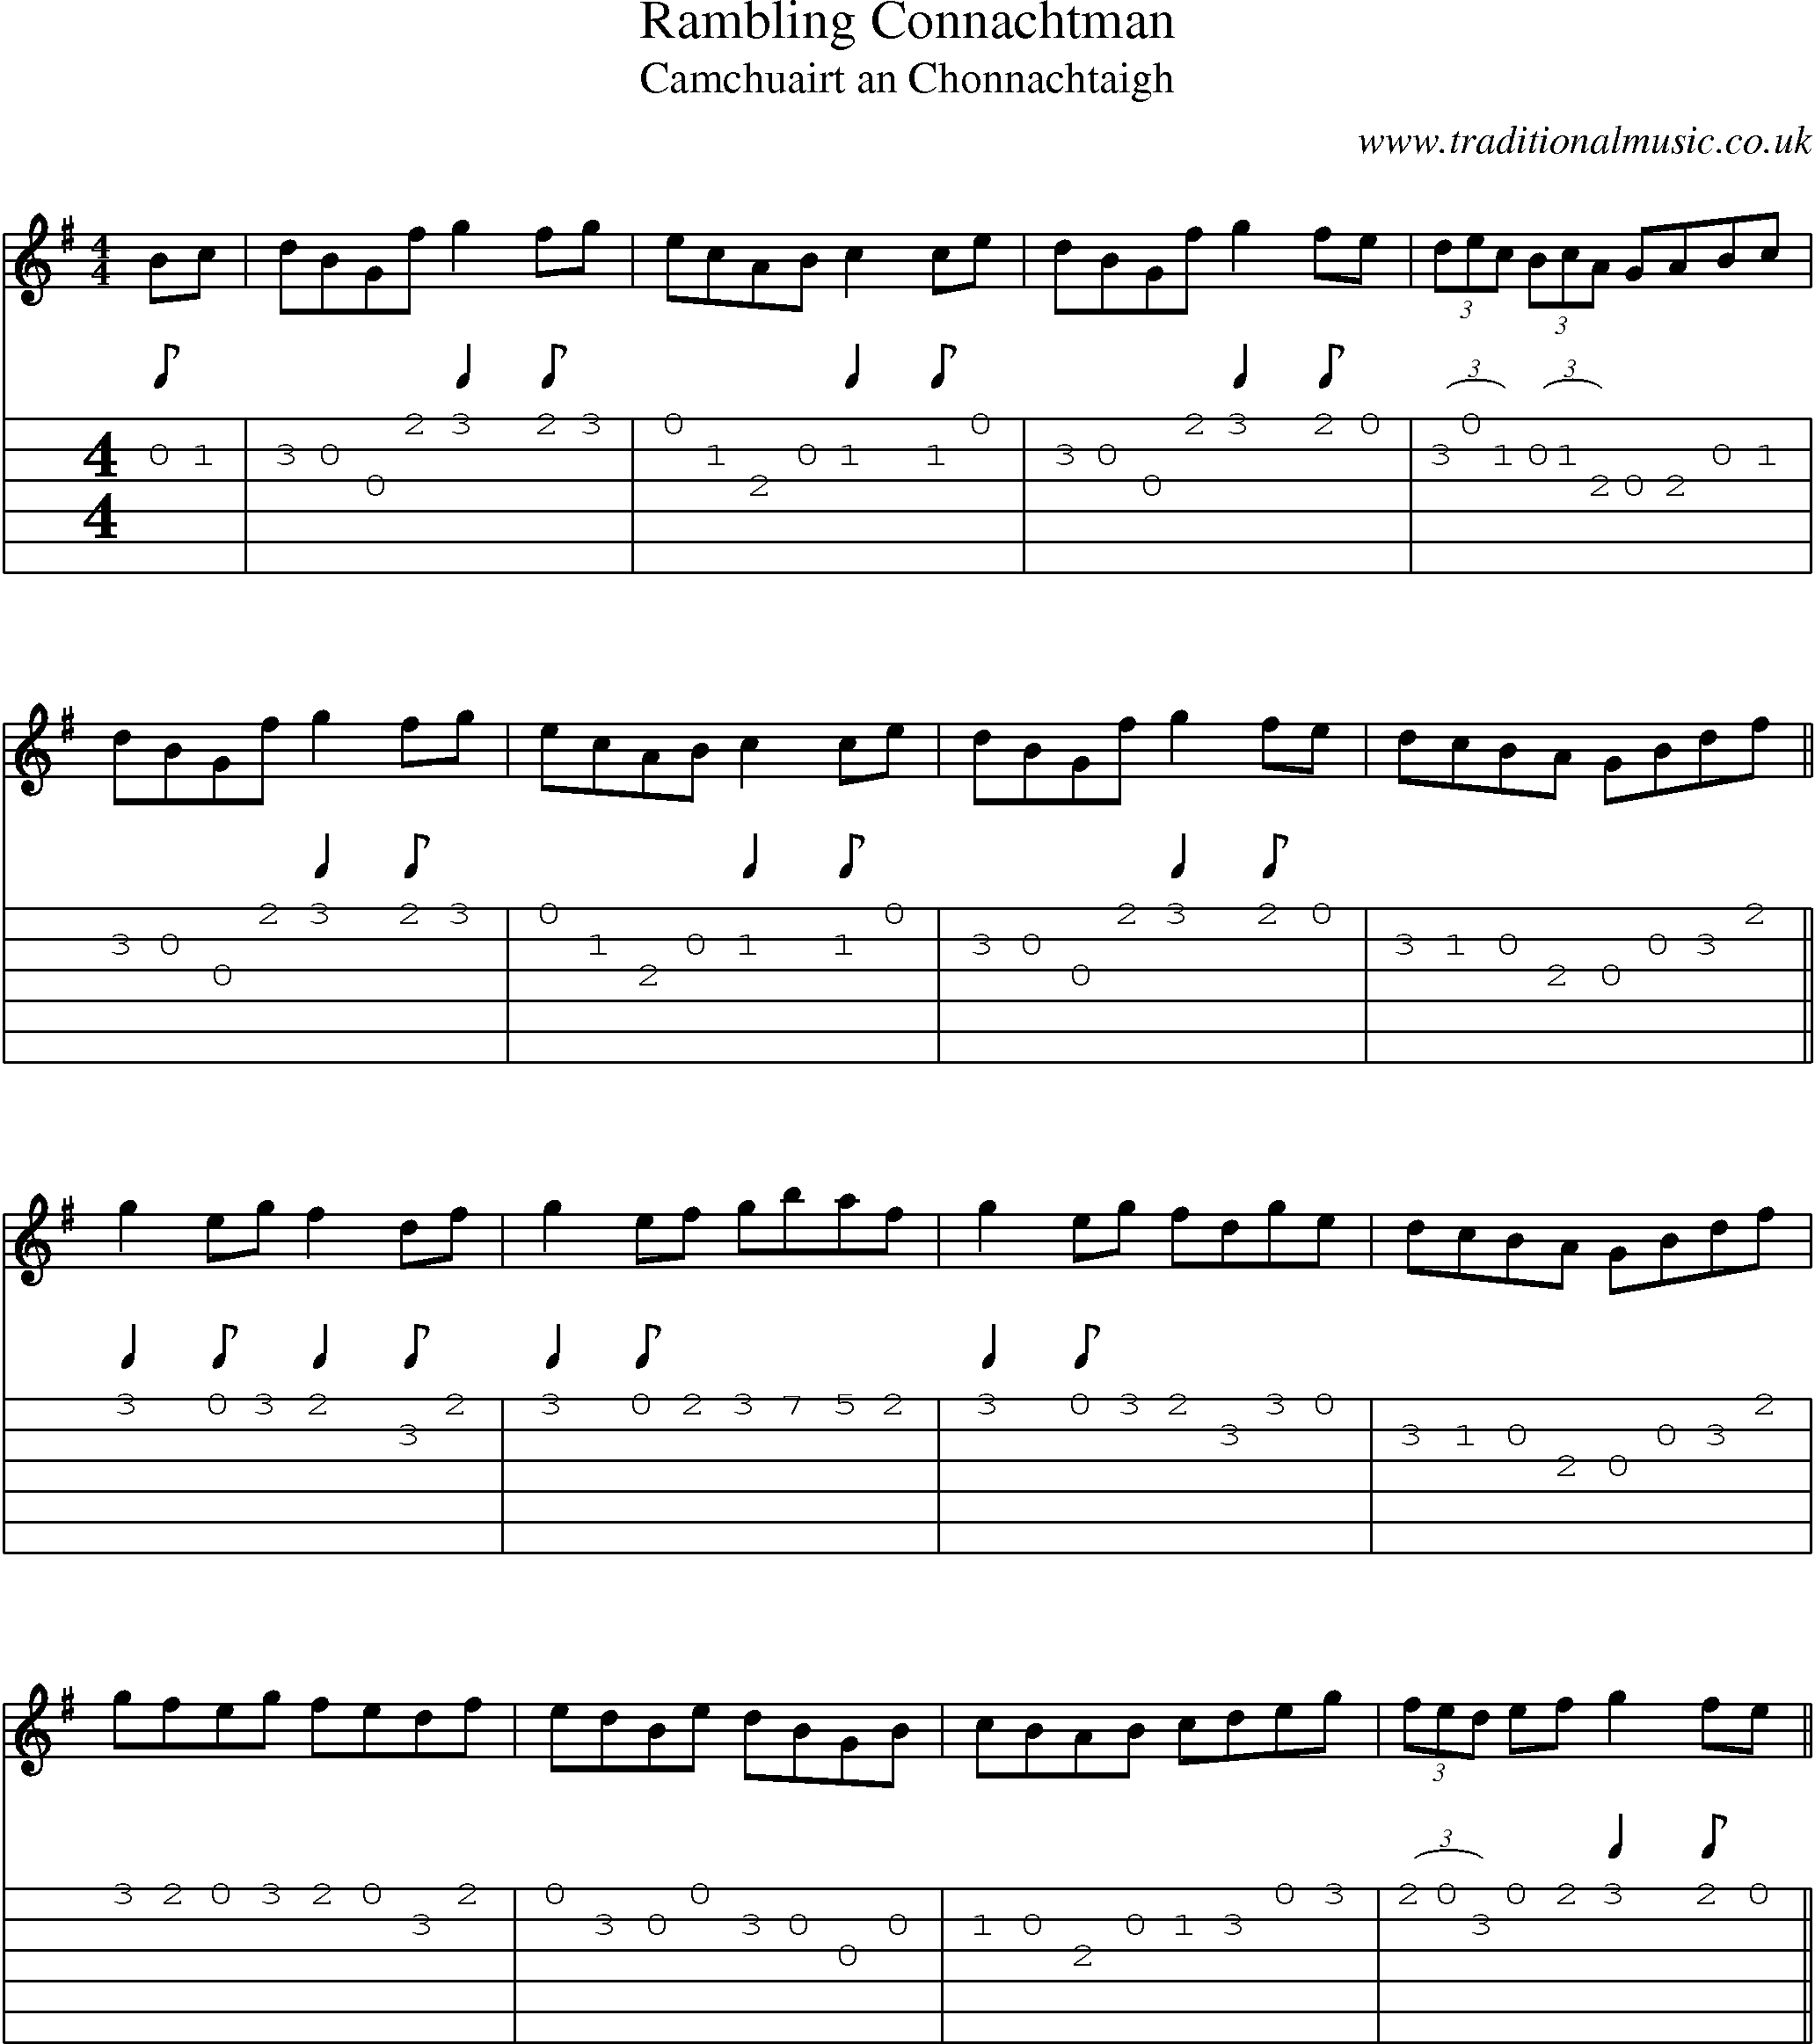 Music Score and Guitar Tabs for Rambling Connachtman